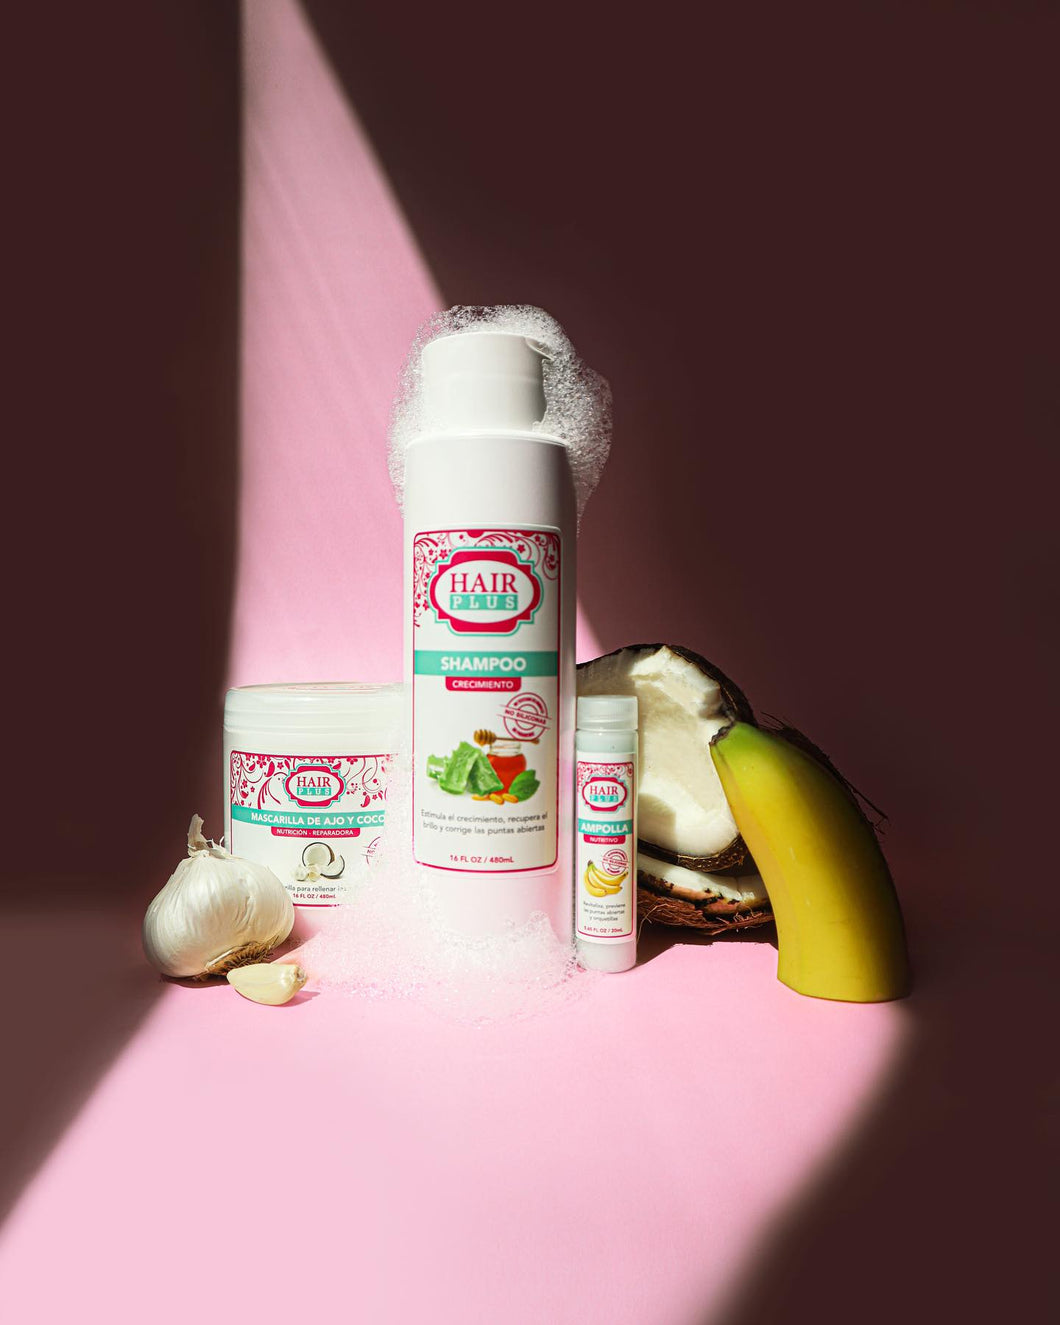 Say goodbye to split ends with our Kit Control Puntas Abiertas. Our 3-step solution gives you 100% of the nourishment you need to keep your hair healthy and vibrant. The kit includes Shampoo Crecimiento, Mascarilla de Ajo y Coco, and Ampolla de Banana, each one clinically proven to moisturize and protect your hair from breakage. Stop stressing and put split ends in the past with the Kit Control Puntas Abiertas.